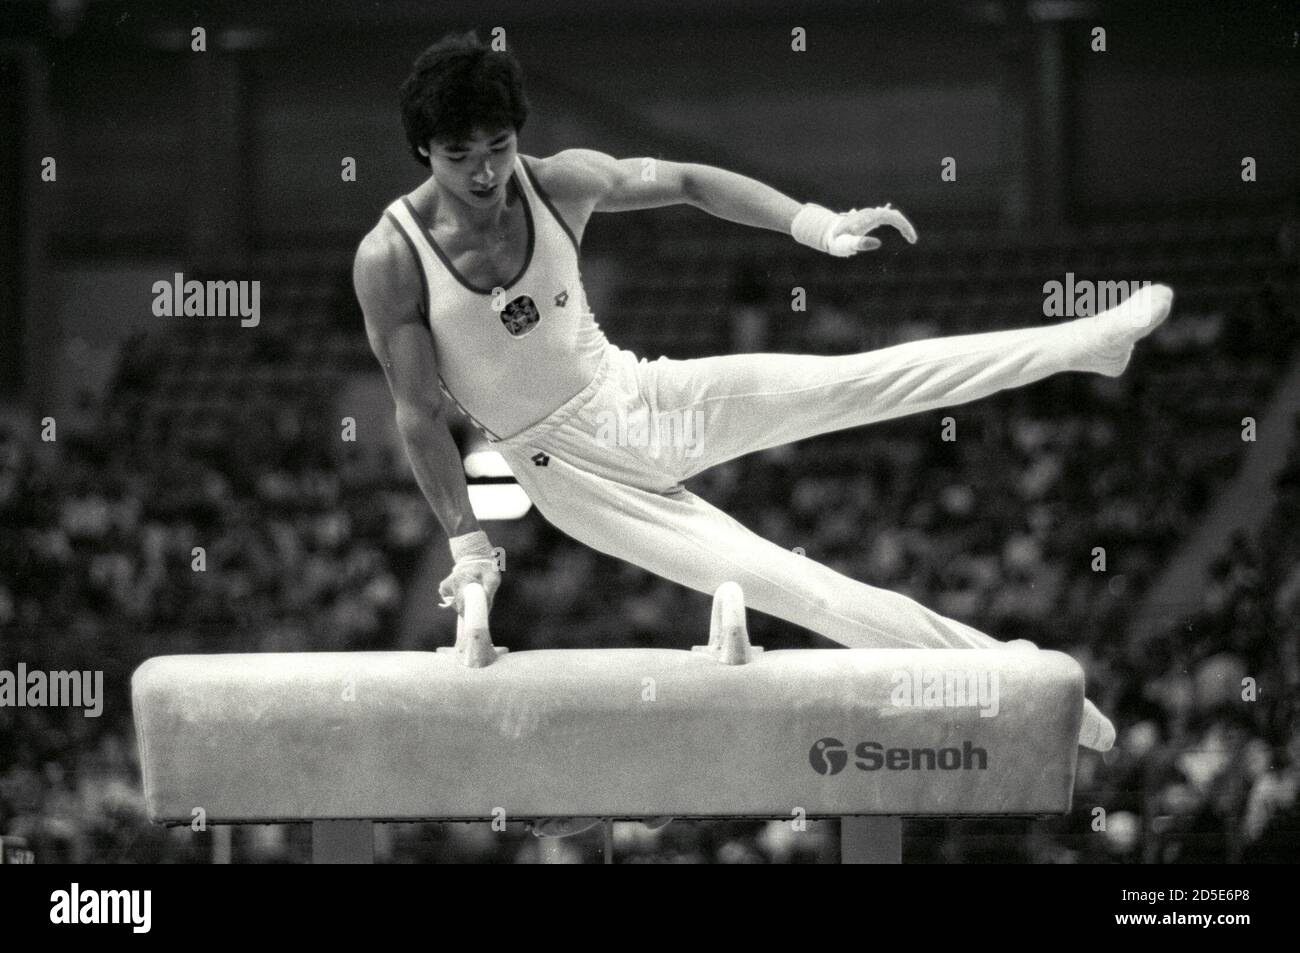 Lam Wai Kin of Hong Kong performs his routine during the pommel horse event of the men's team competition September 21, 1986 during the Asian Games in Seoul. SCANNED FROM NEGATIVE. REUTERS/Shunsuke Akatsuka  GDB/CMC/PN Stock Photo